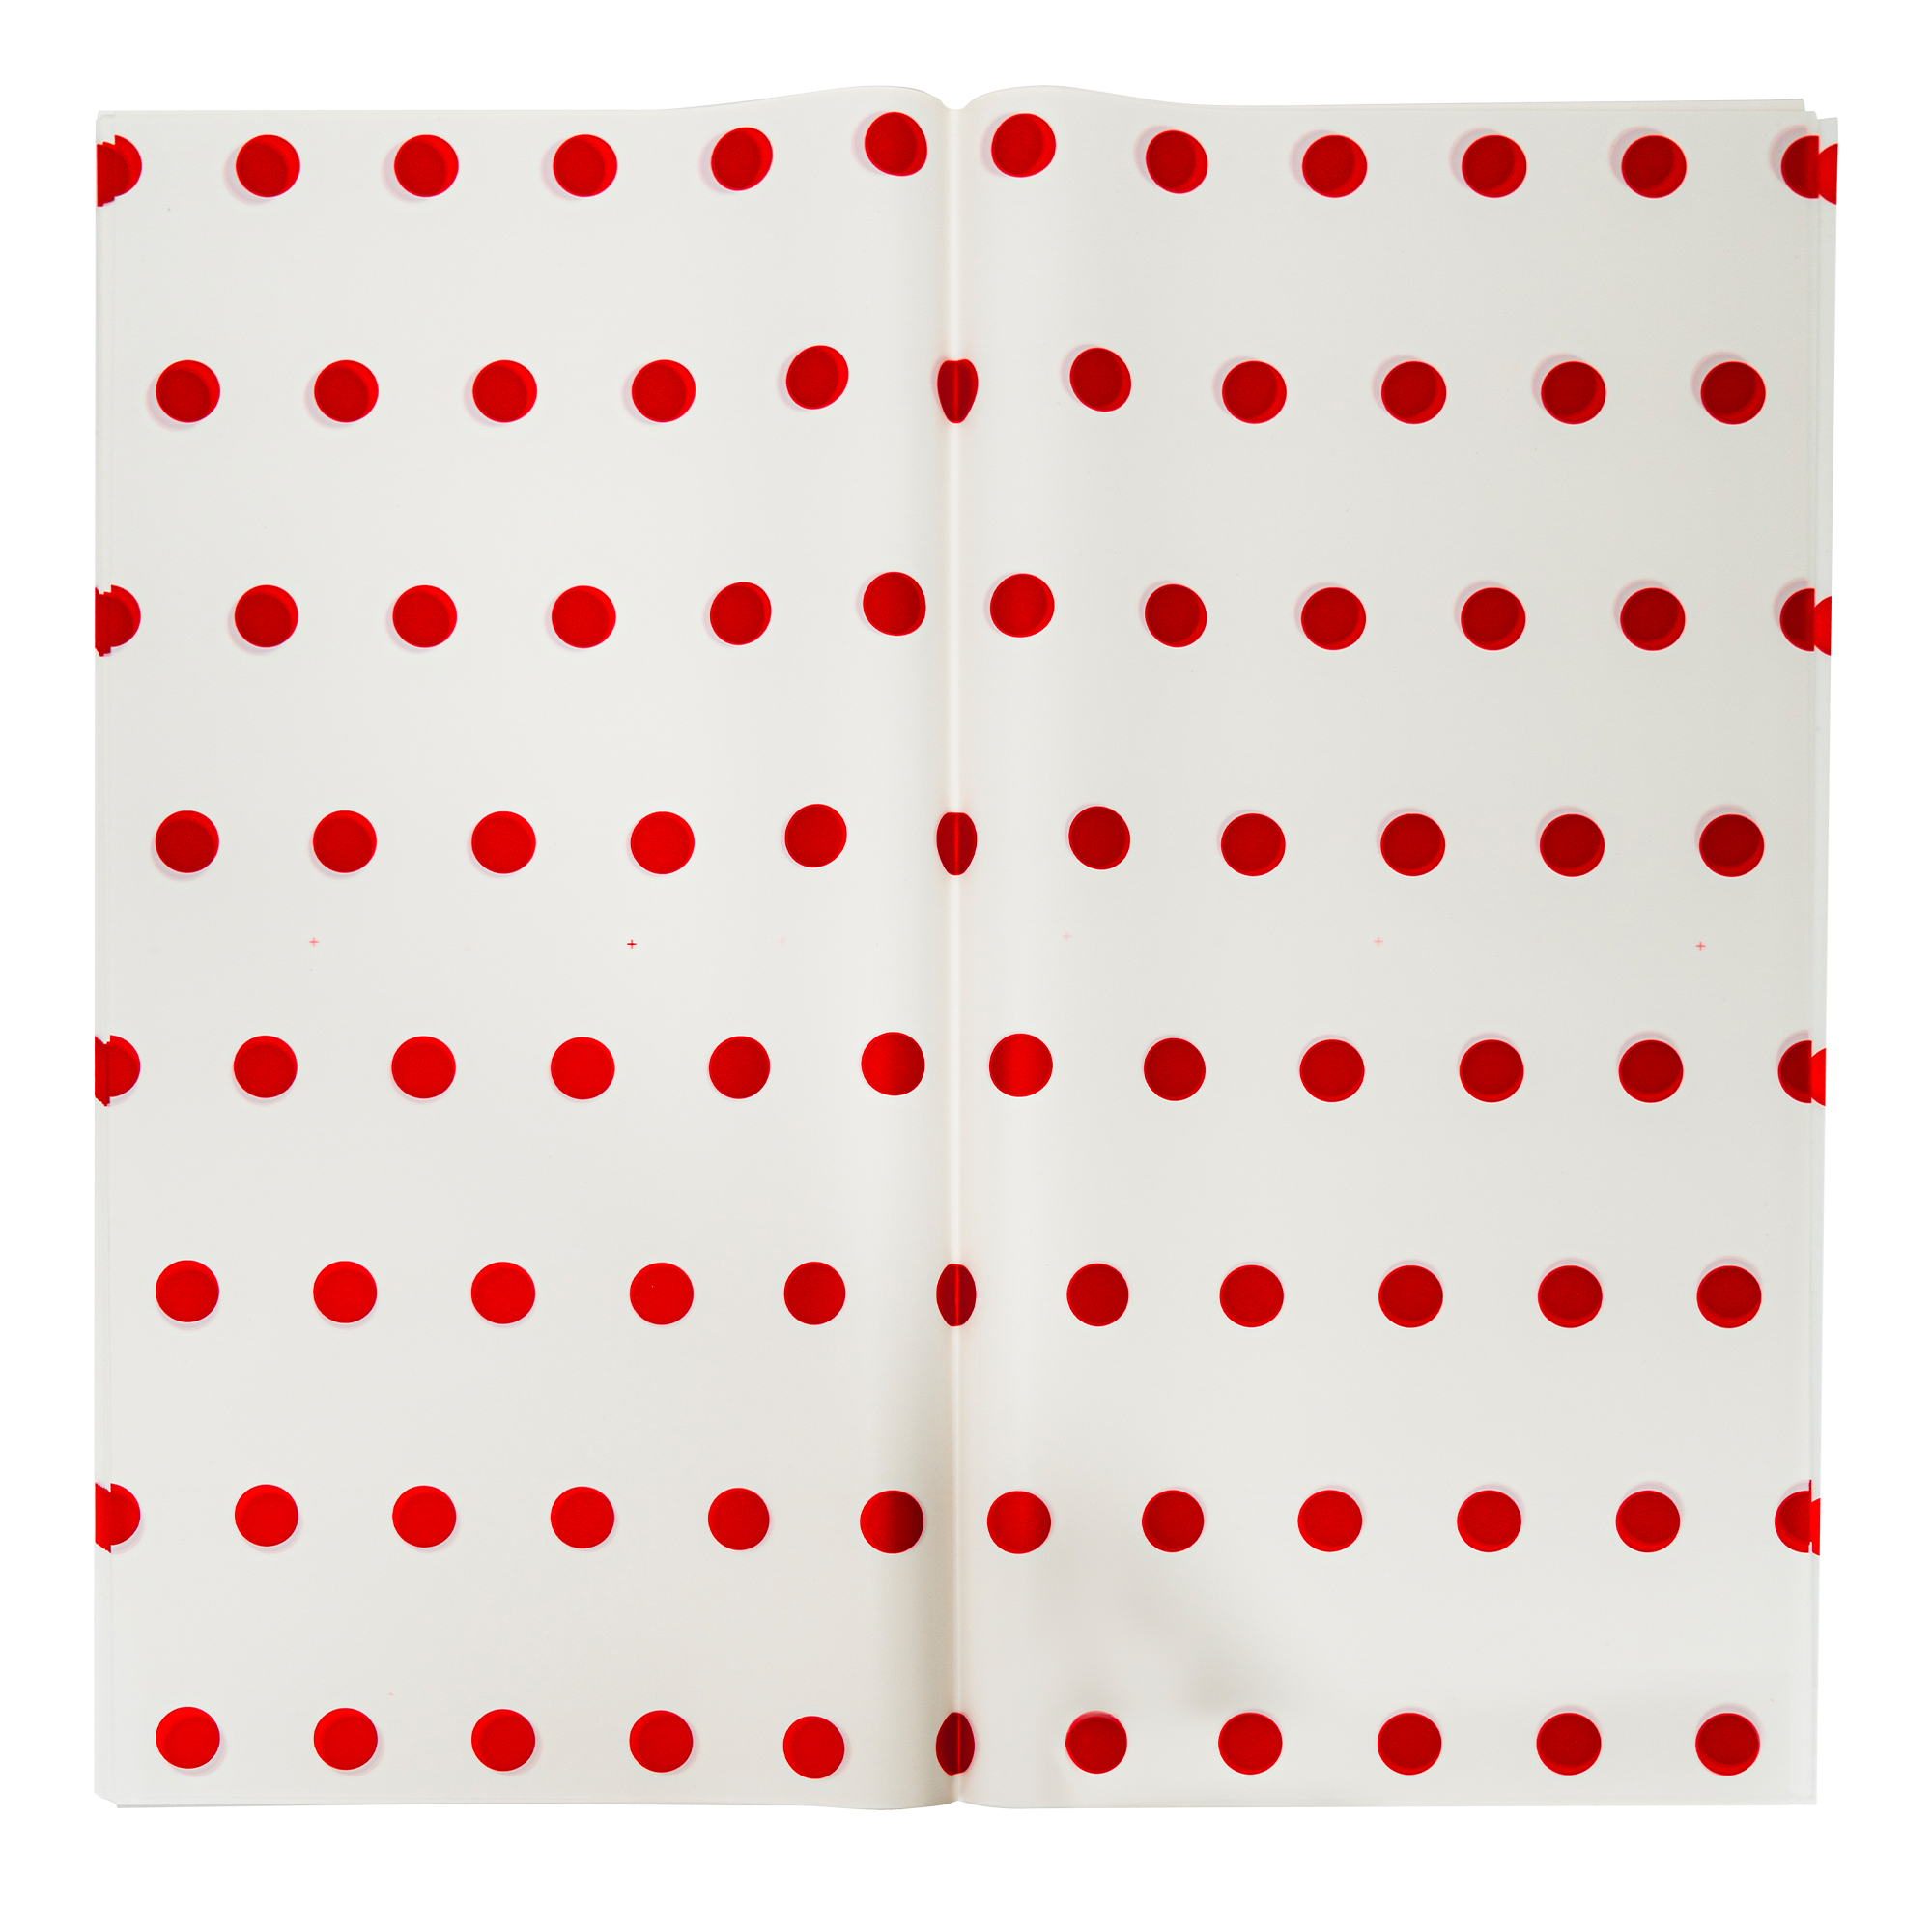 Floral Wrapping Paper With Polka Dots 20pc/pack  - Red